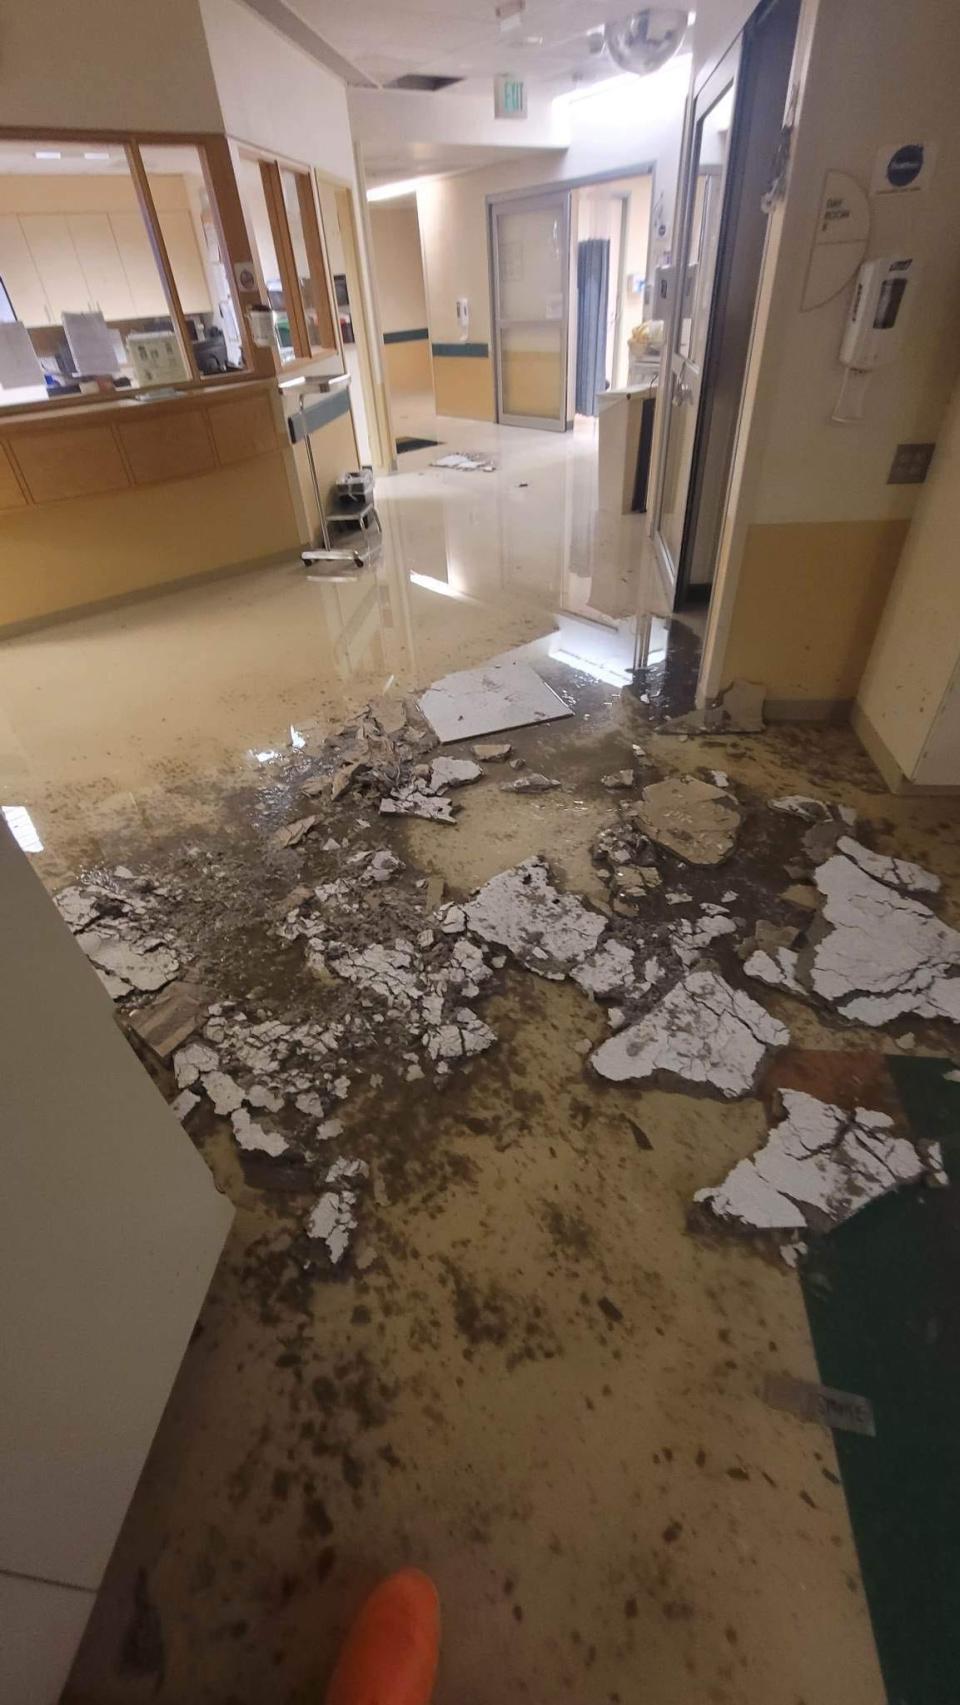 Flooding that destroyed operating rooms at Frisbie Memorial Hospital due to burst pipes in February.